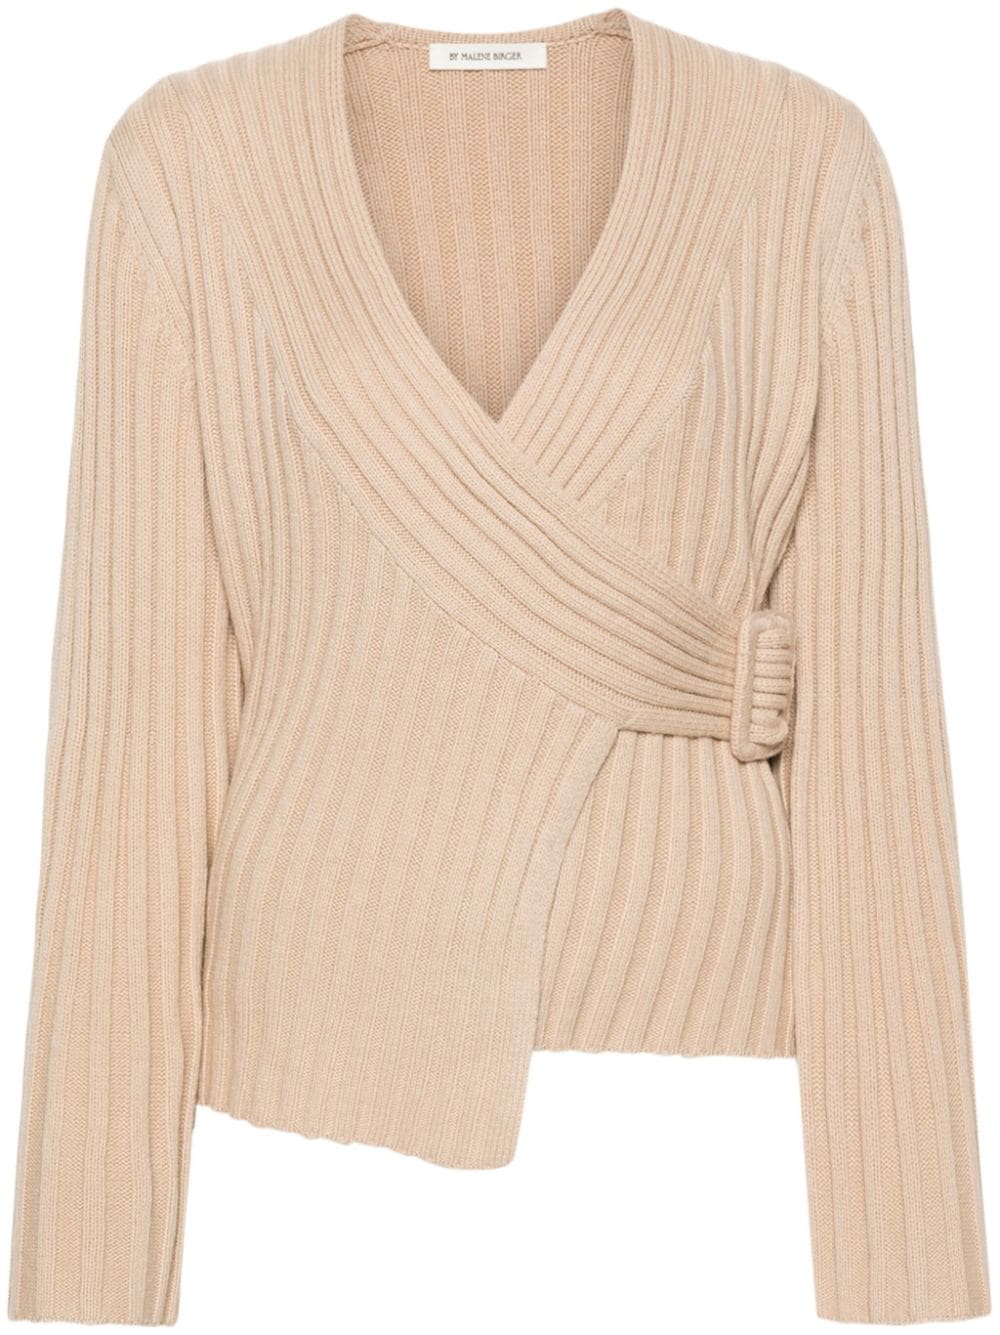 By Malene Birger chunky-ribbed wrap top - Neutrals von By Malene Birger